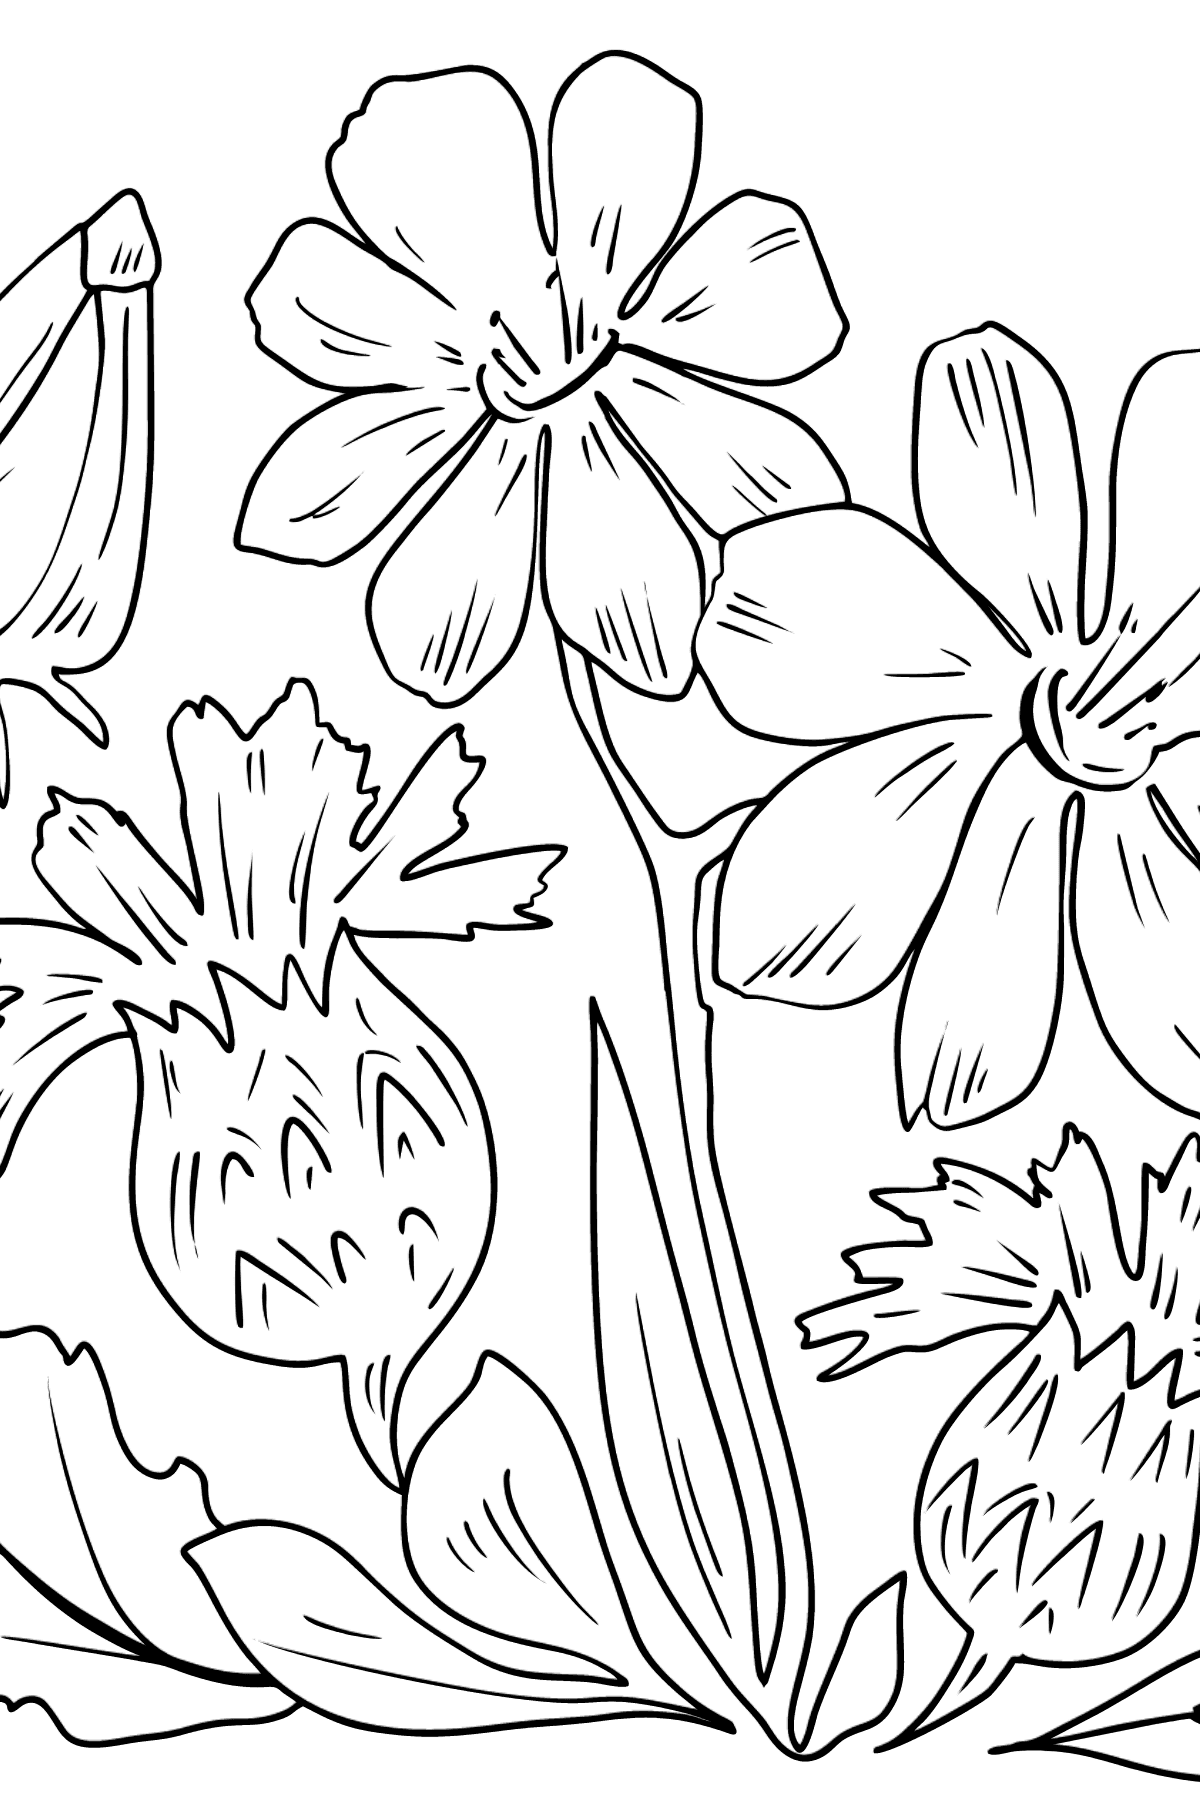 Flower Coloring Page - flowers in the meadow - Coloring Pages for Kids